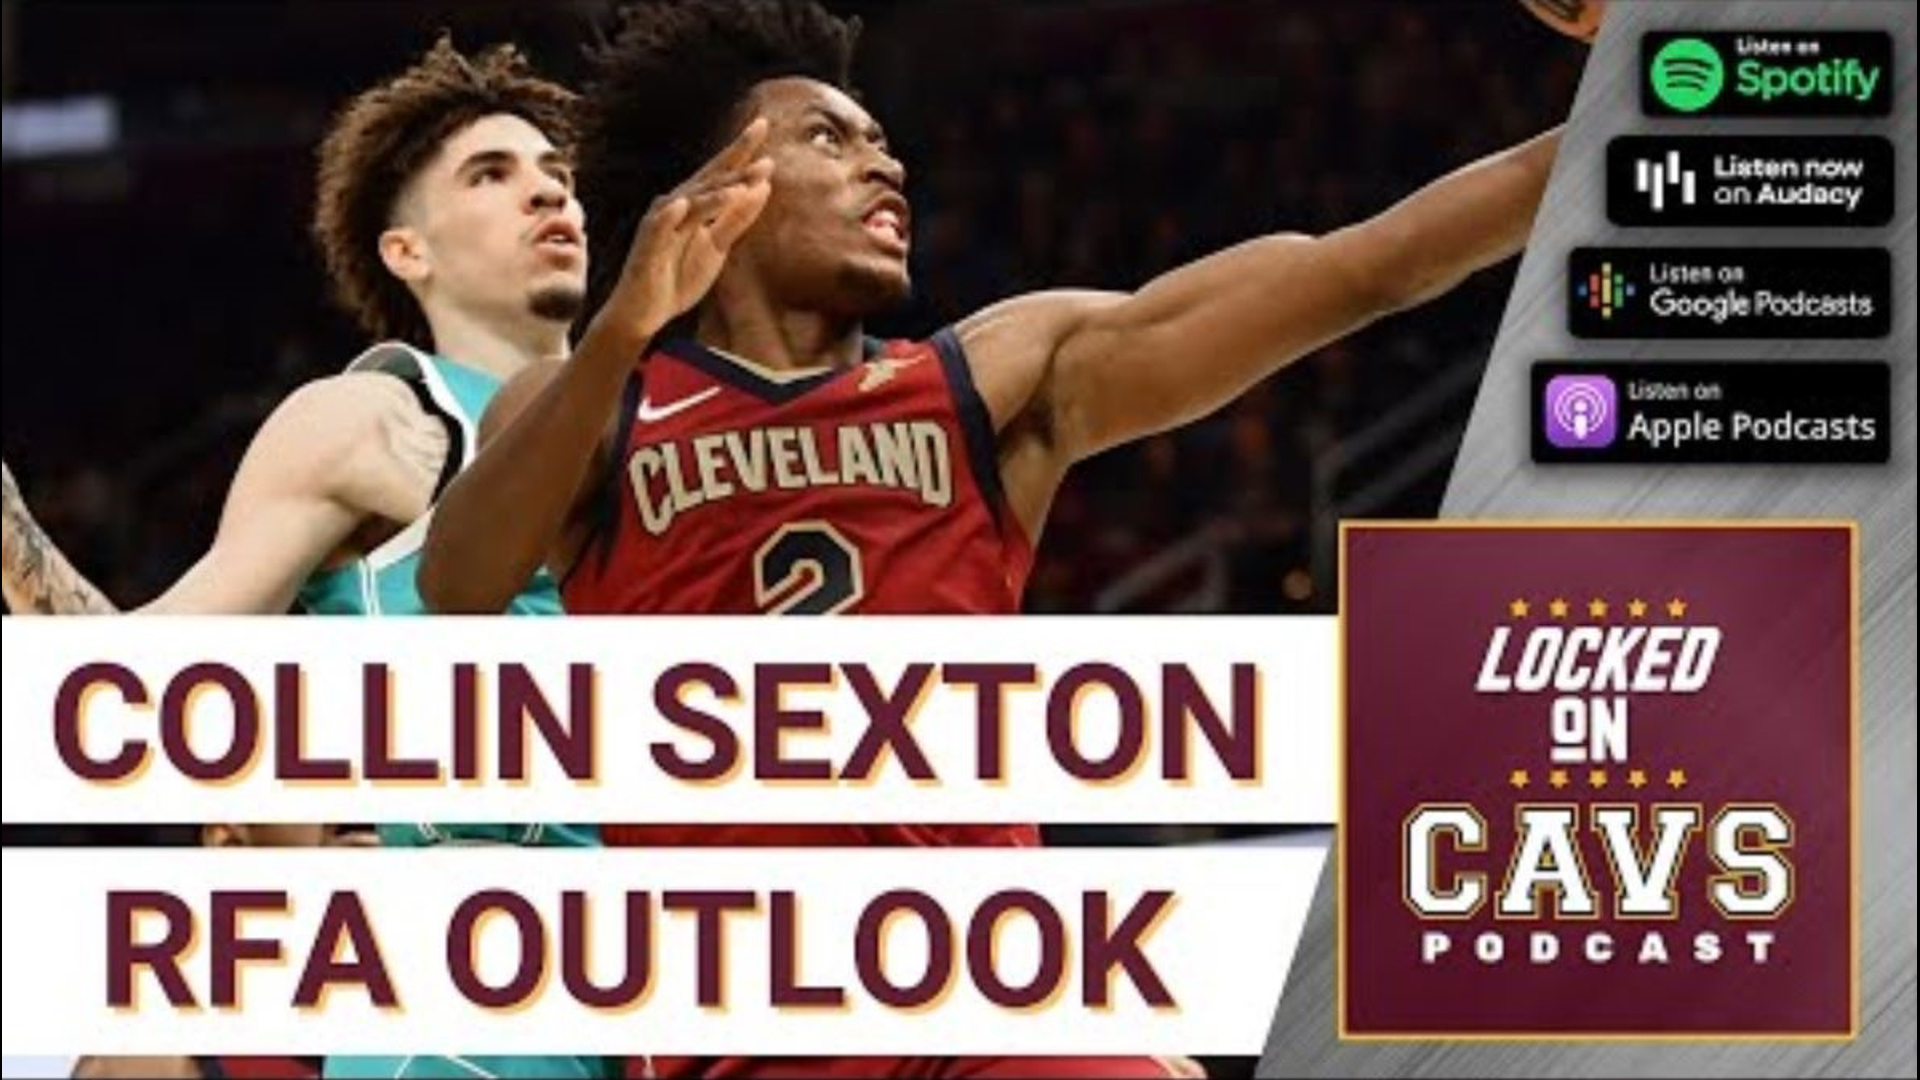 Host Chris Manning is first joined by Locked on NBA insider Antonio Daniels to talk about Collin Sexton's impending free agency.